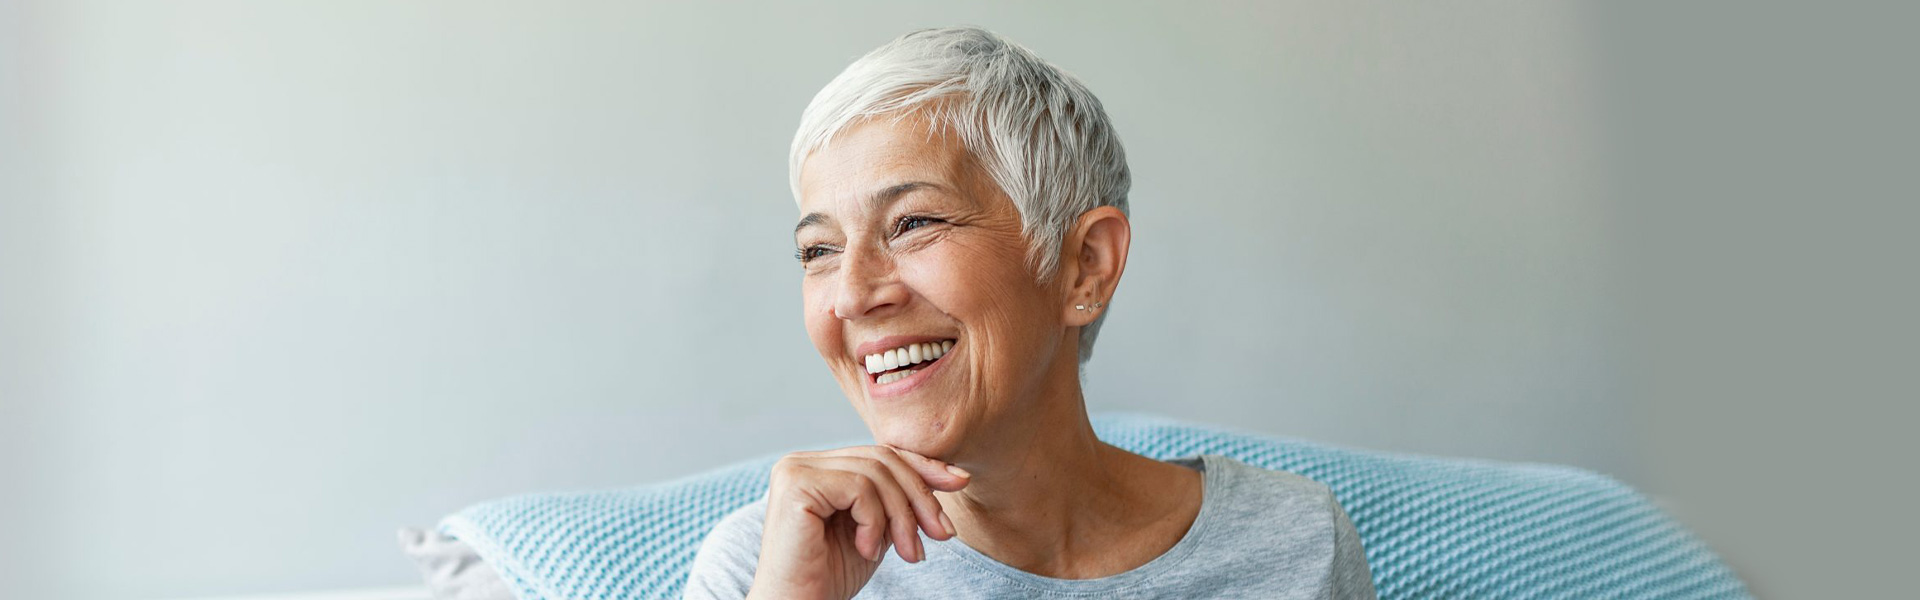 DENTURES: TYPES, HOW TO GET THEM AND CARE TIPS